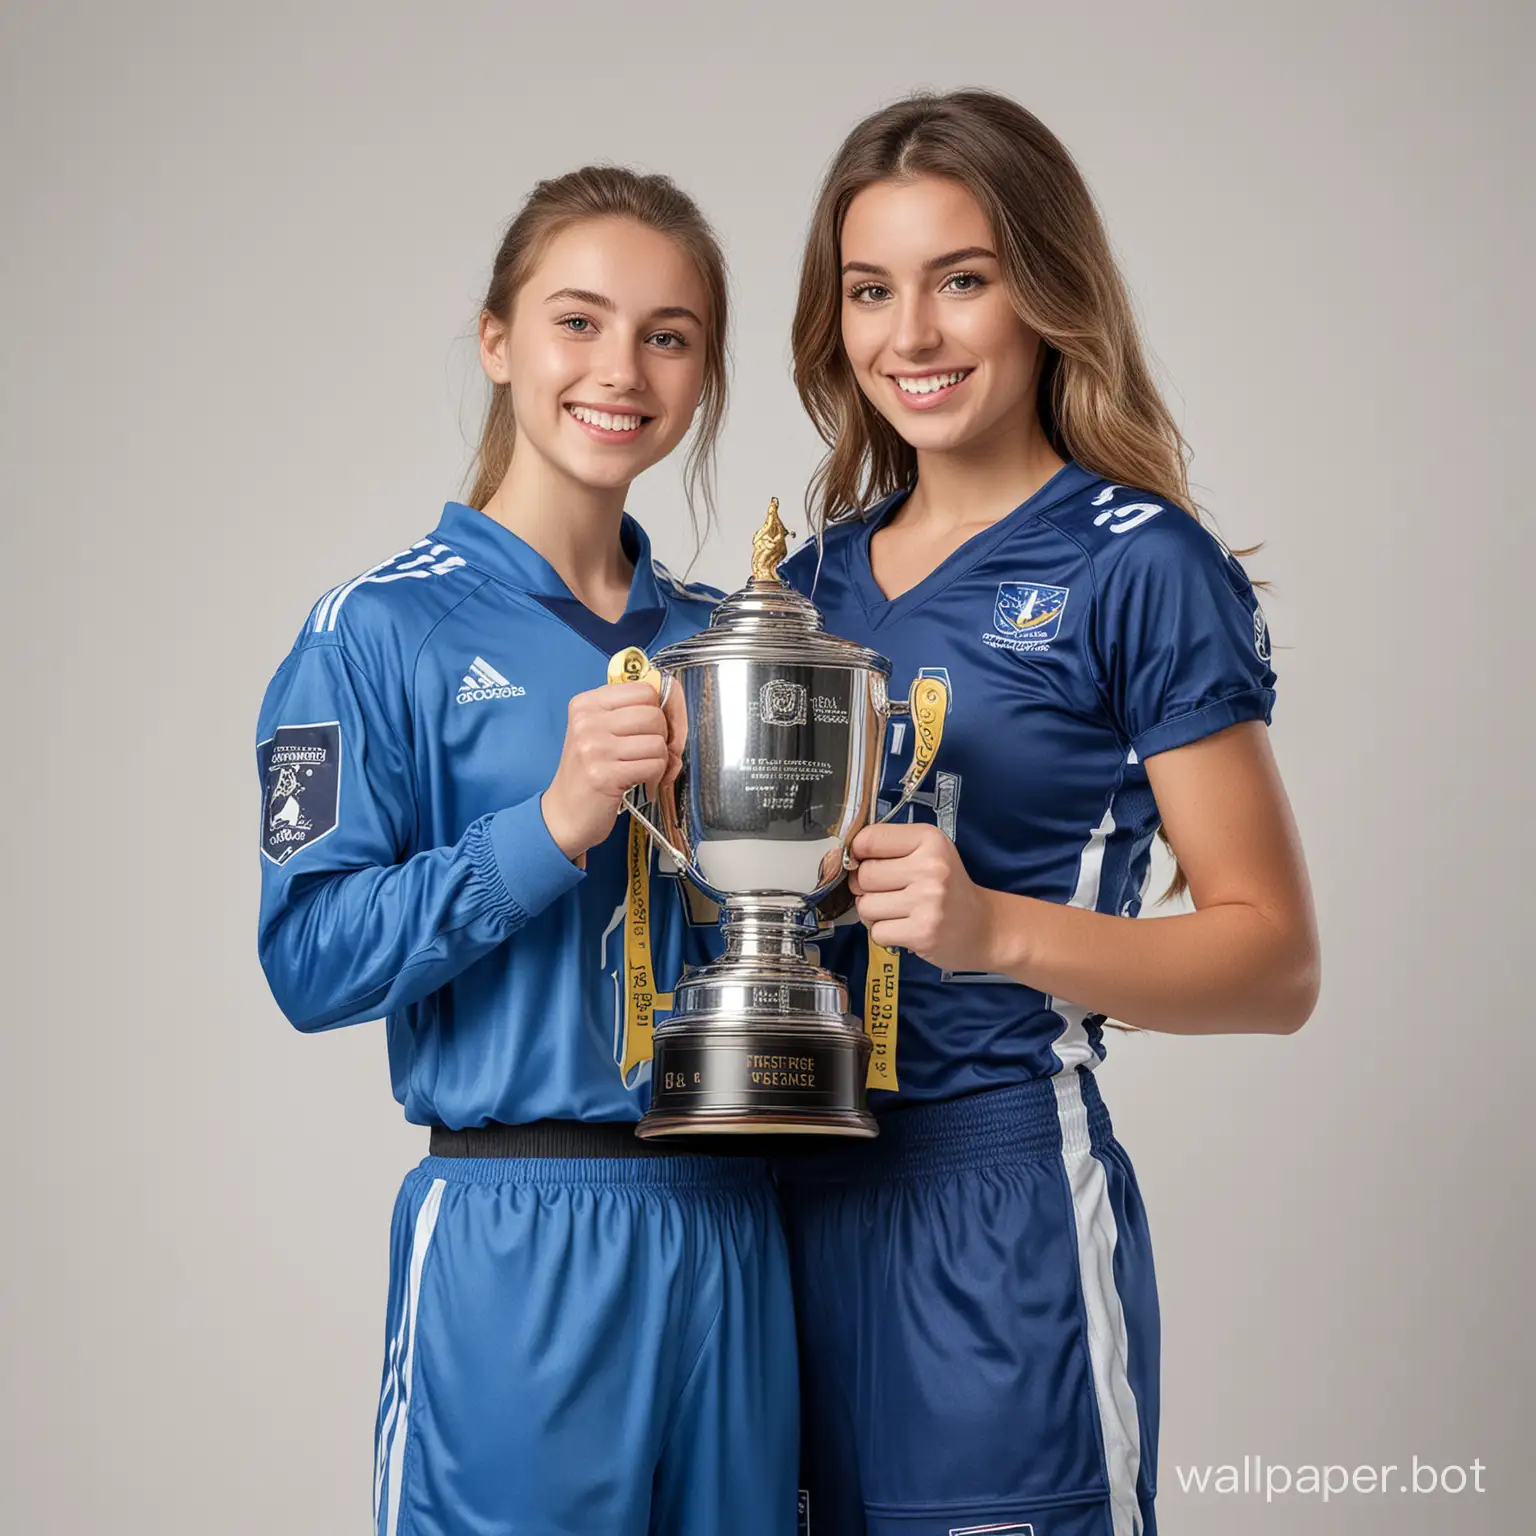 A 23-year-old football player in a blue uniform and a 26-year-old girl in a blue uniform hold a huge winner's cup against a white background.